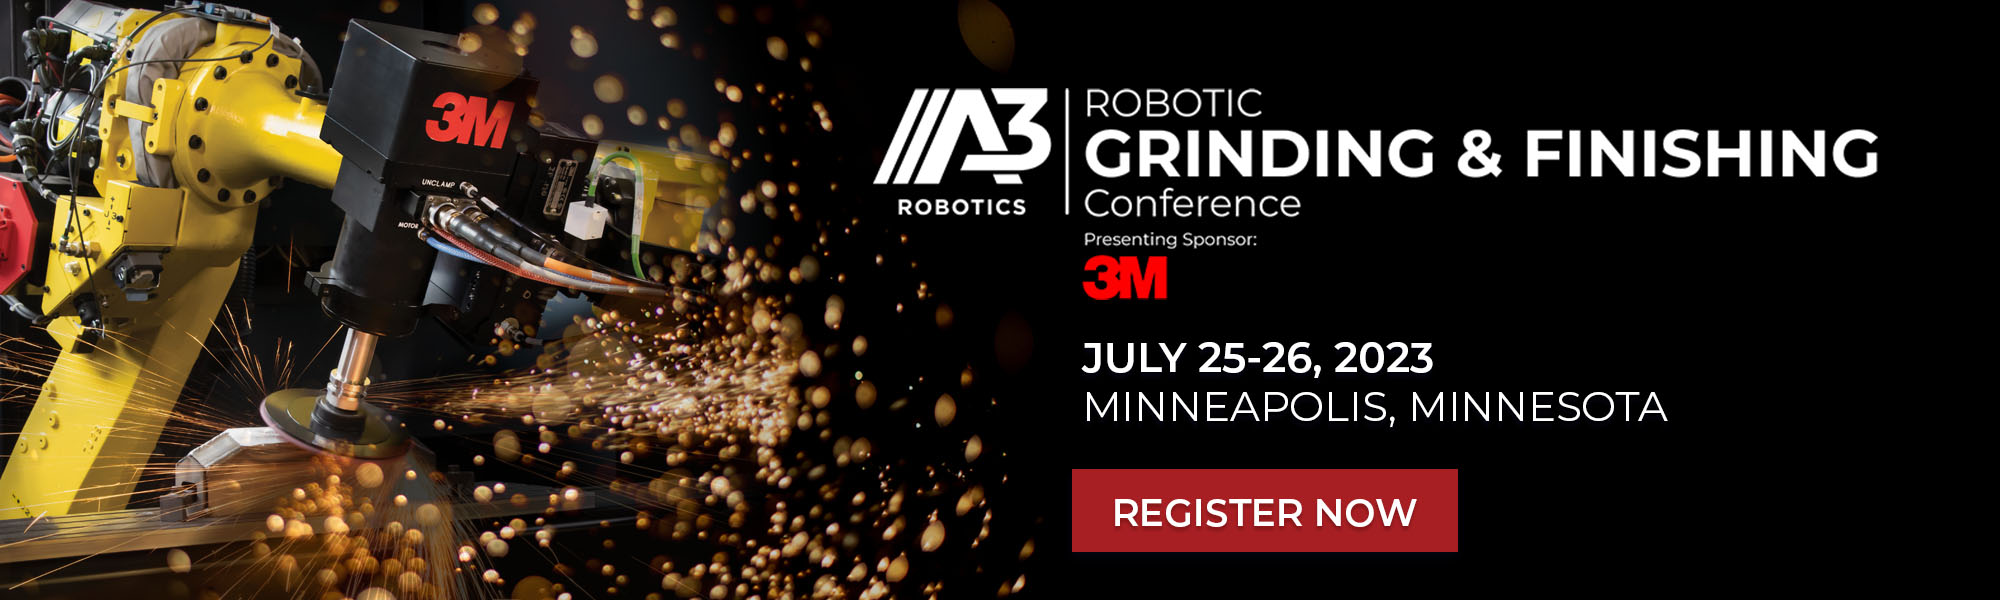 Robotic Grinding and Finishing Conference